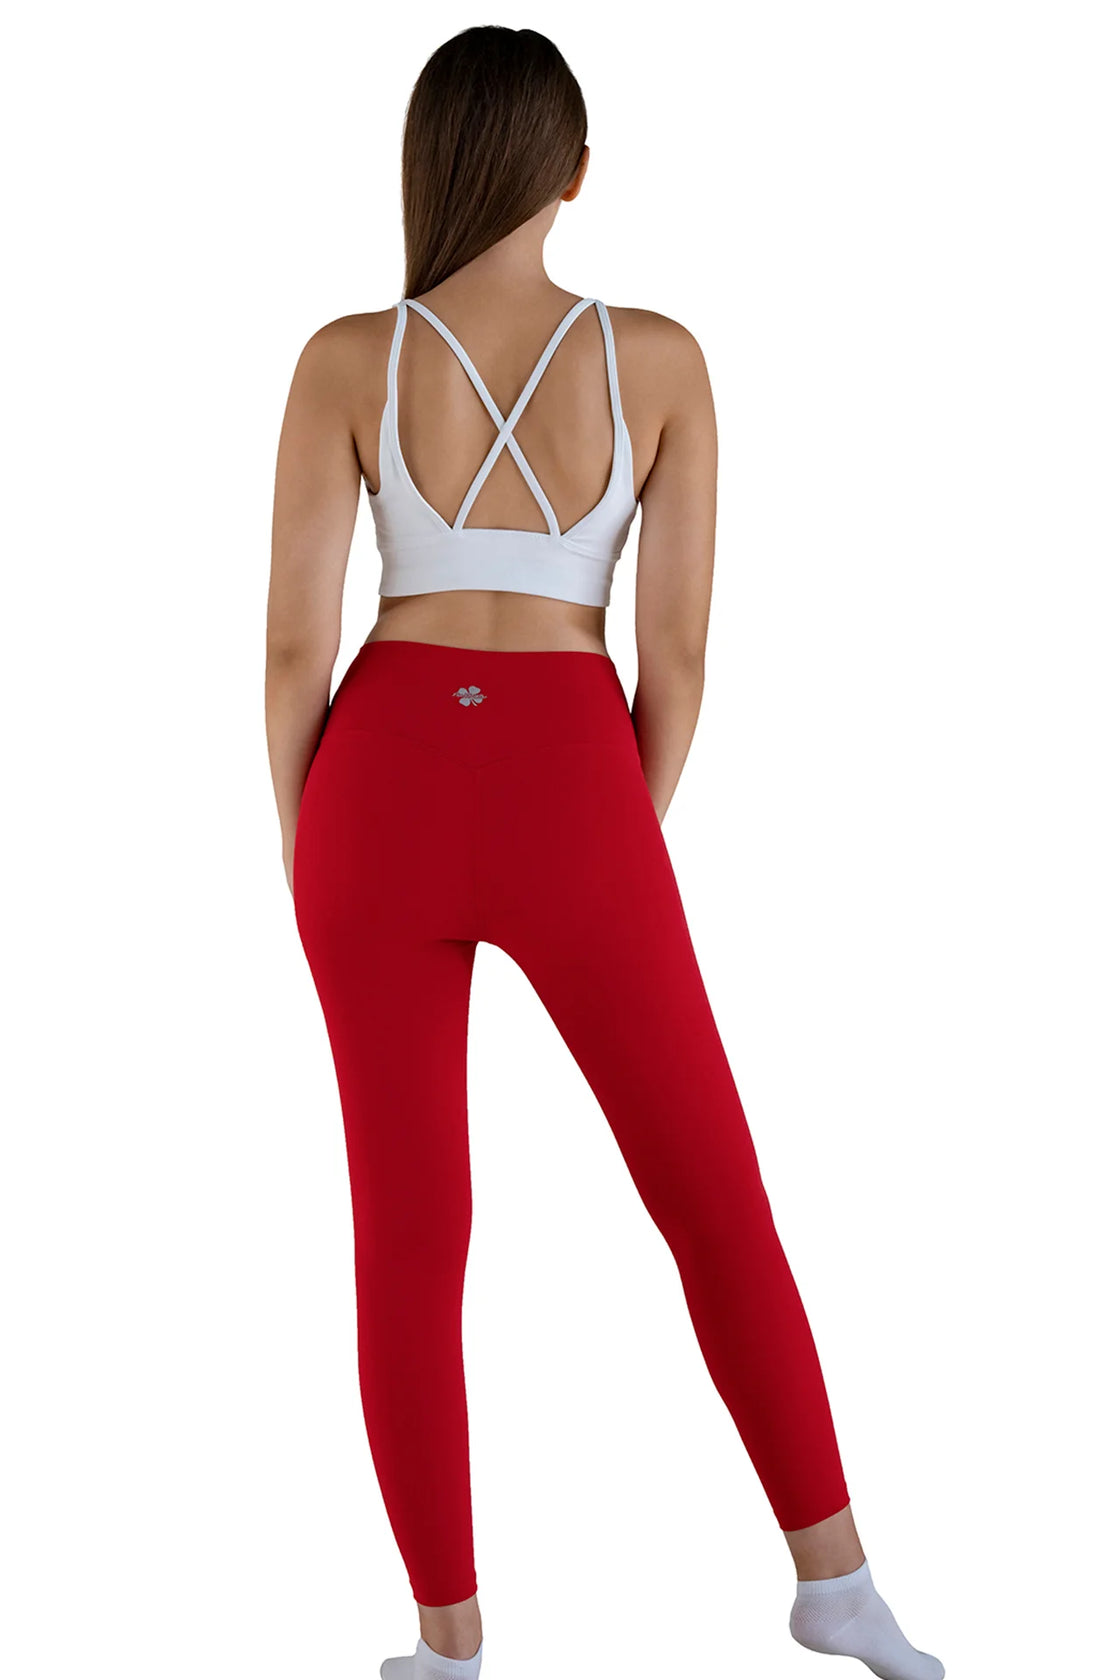 High waist leggings for yoga in red color